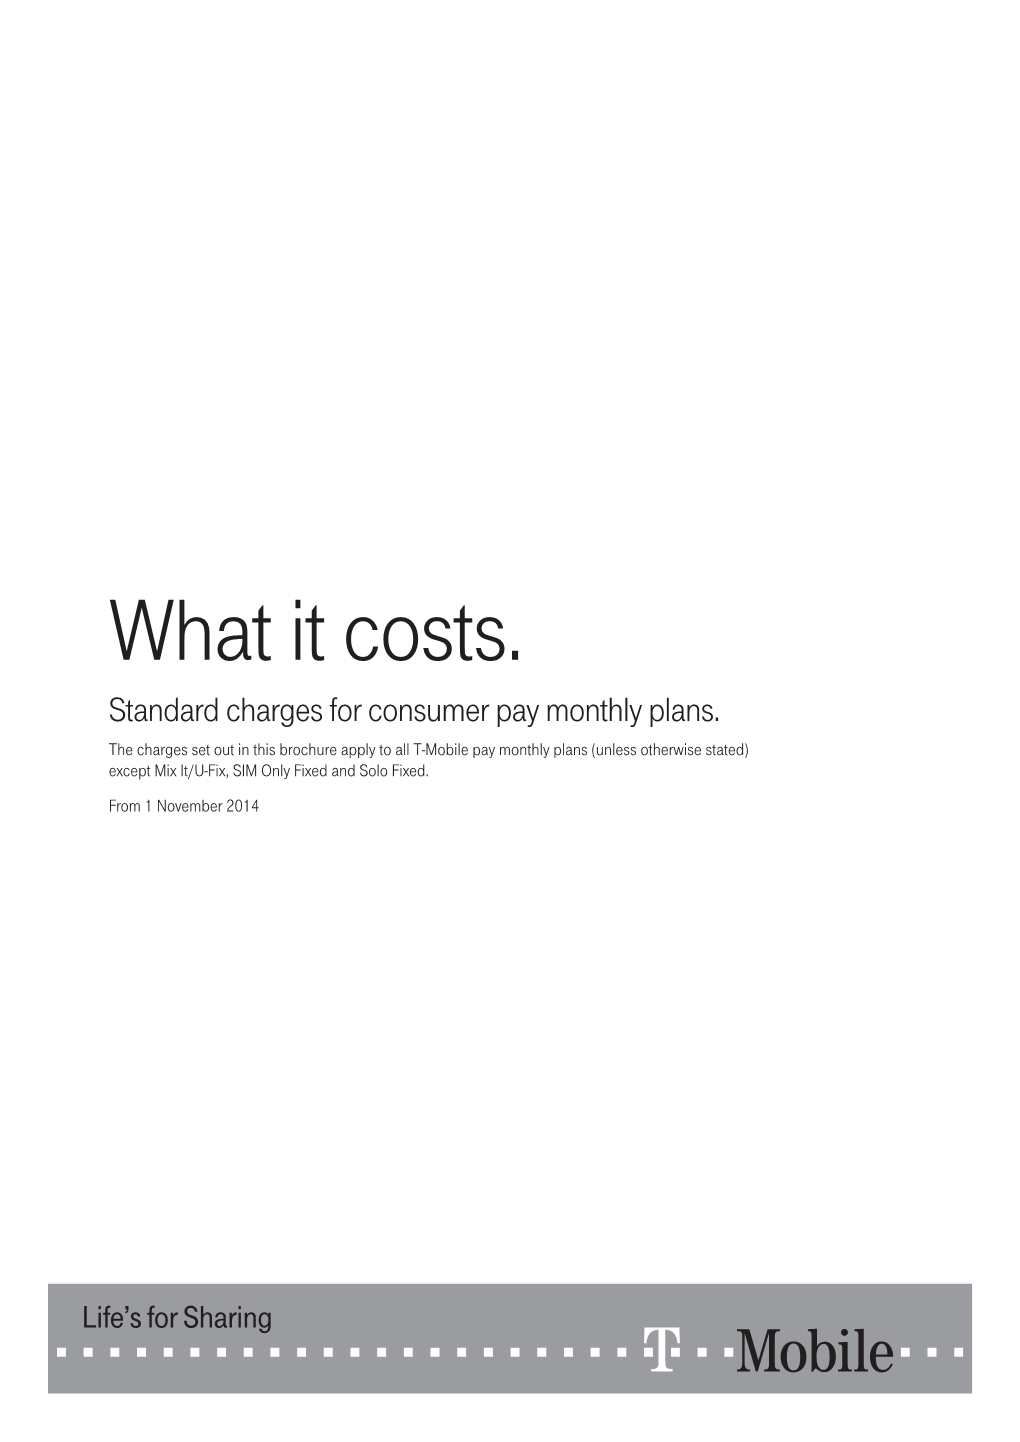 What It Costs. Standard Charges for Consumer Pay Monthly Plans